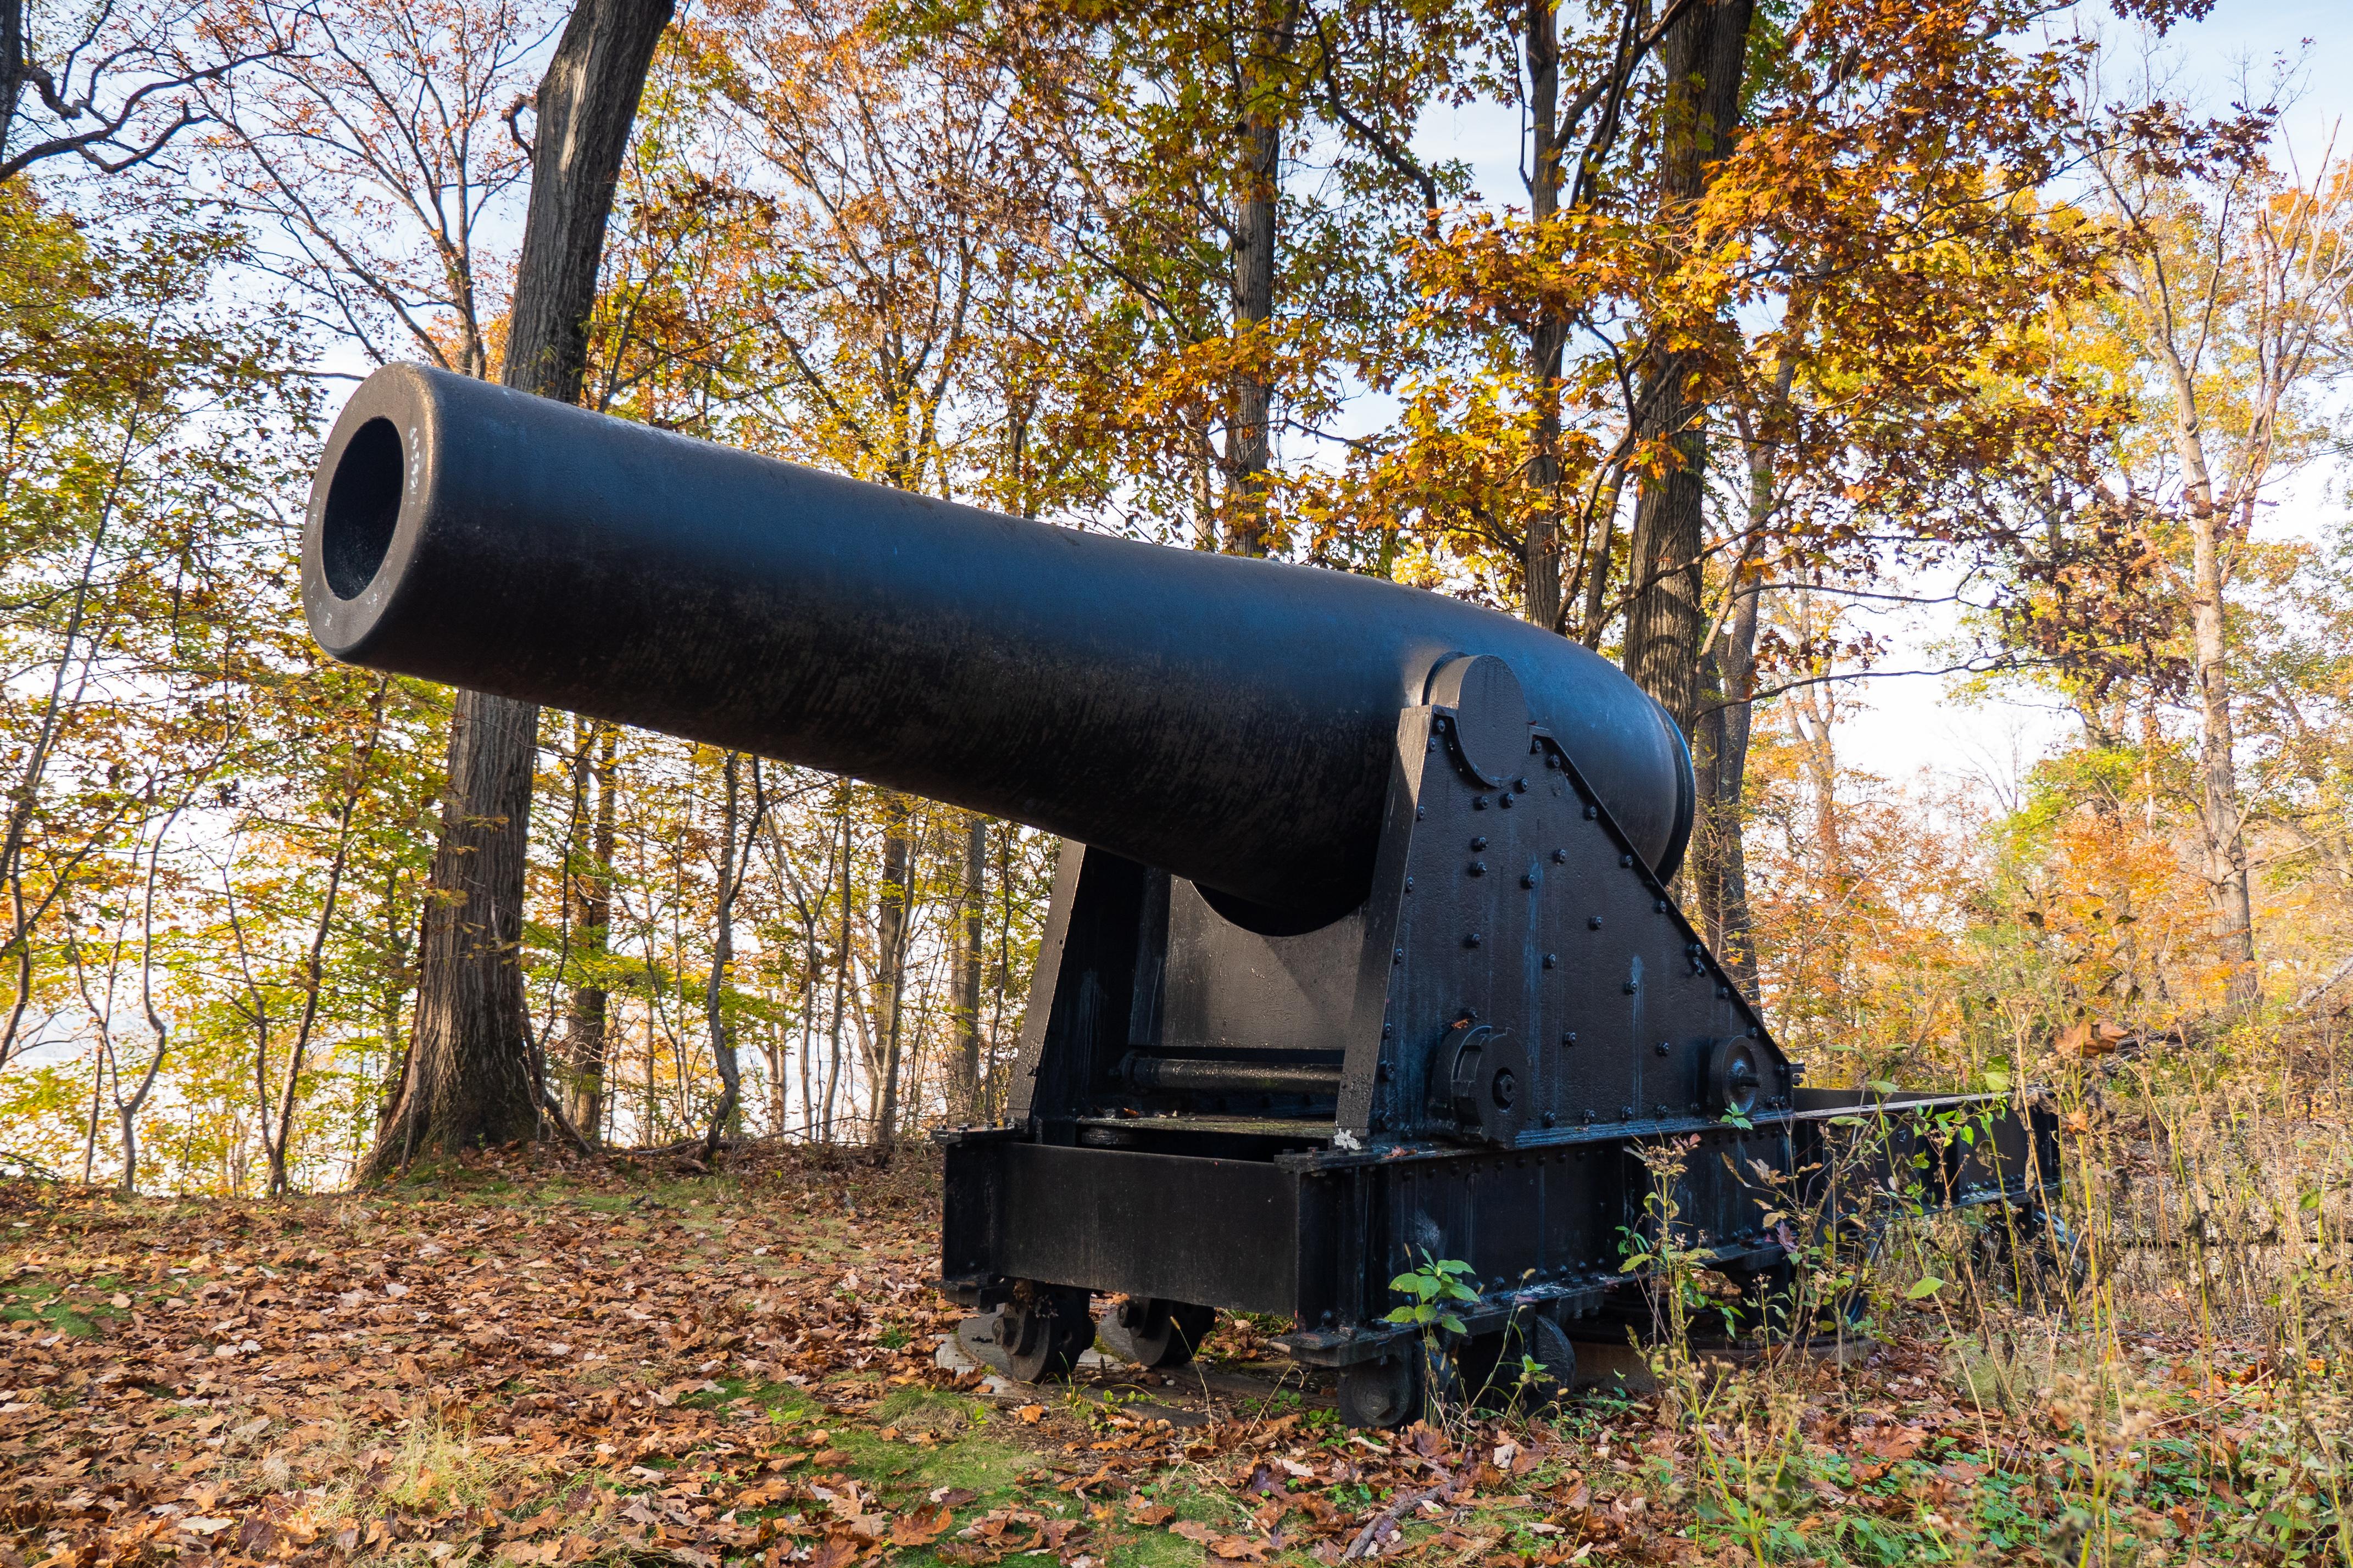 A cannon in front of fall leaves